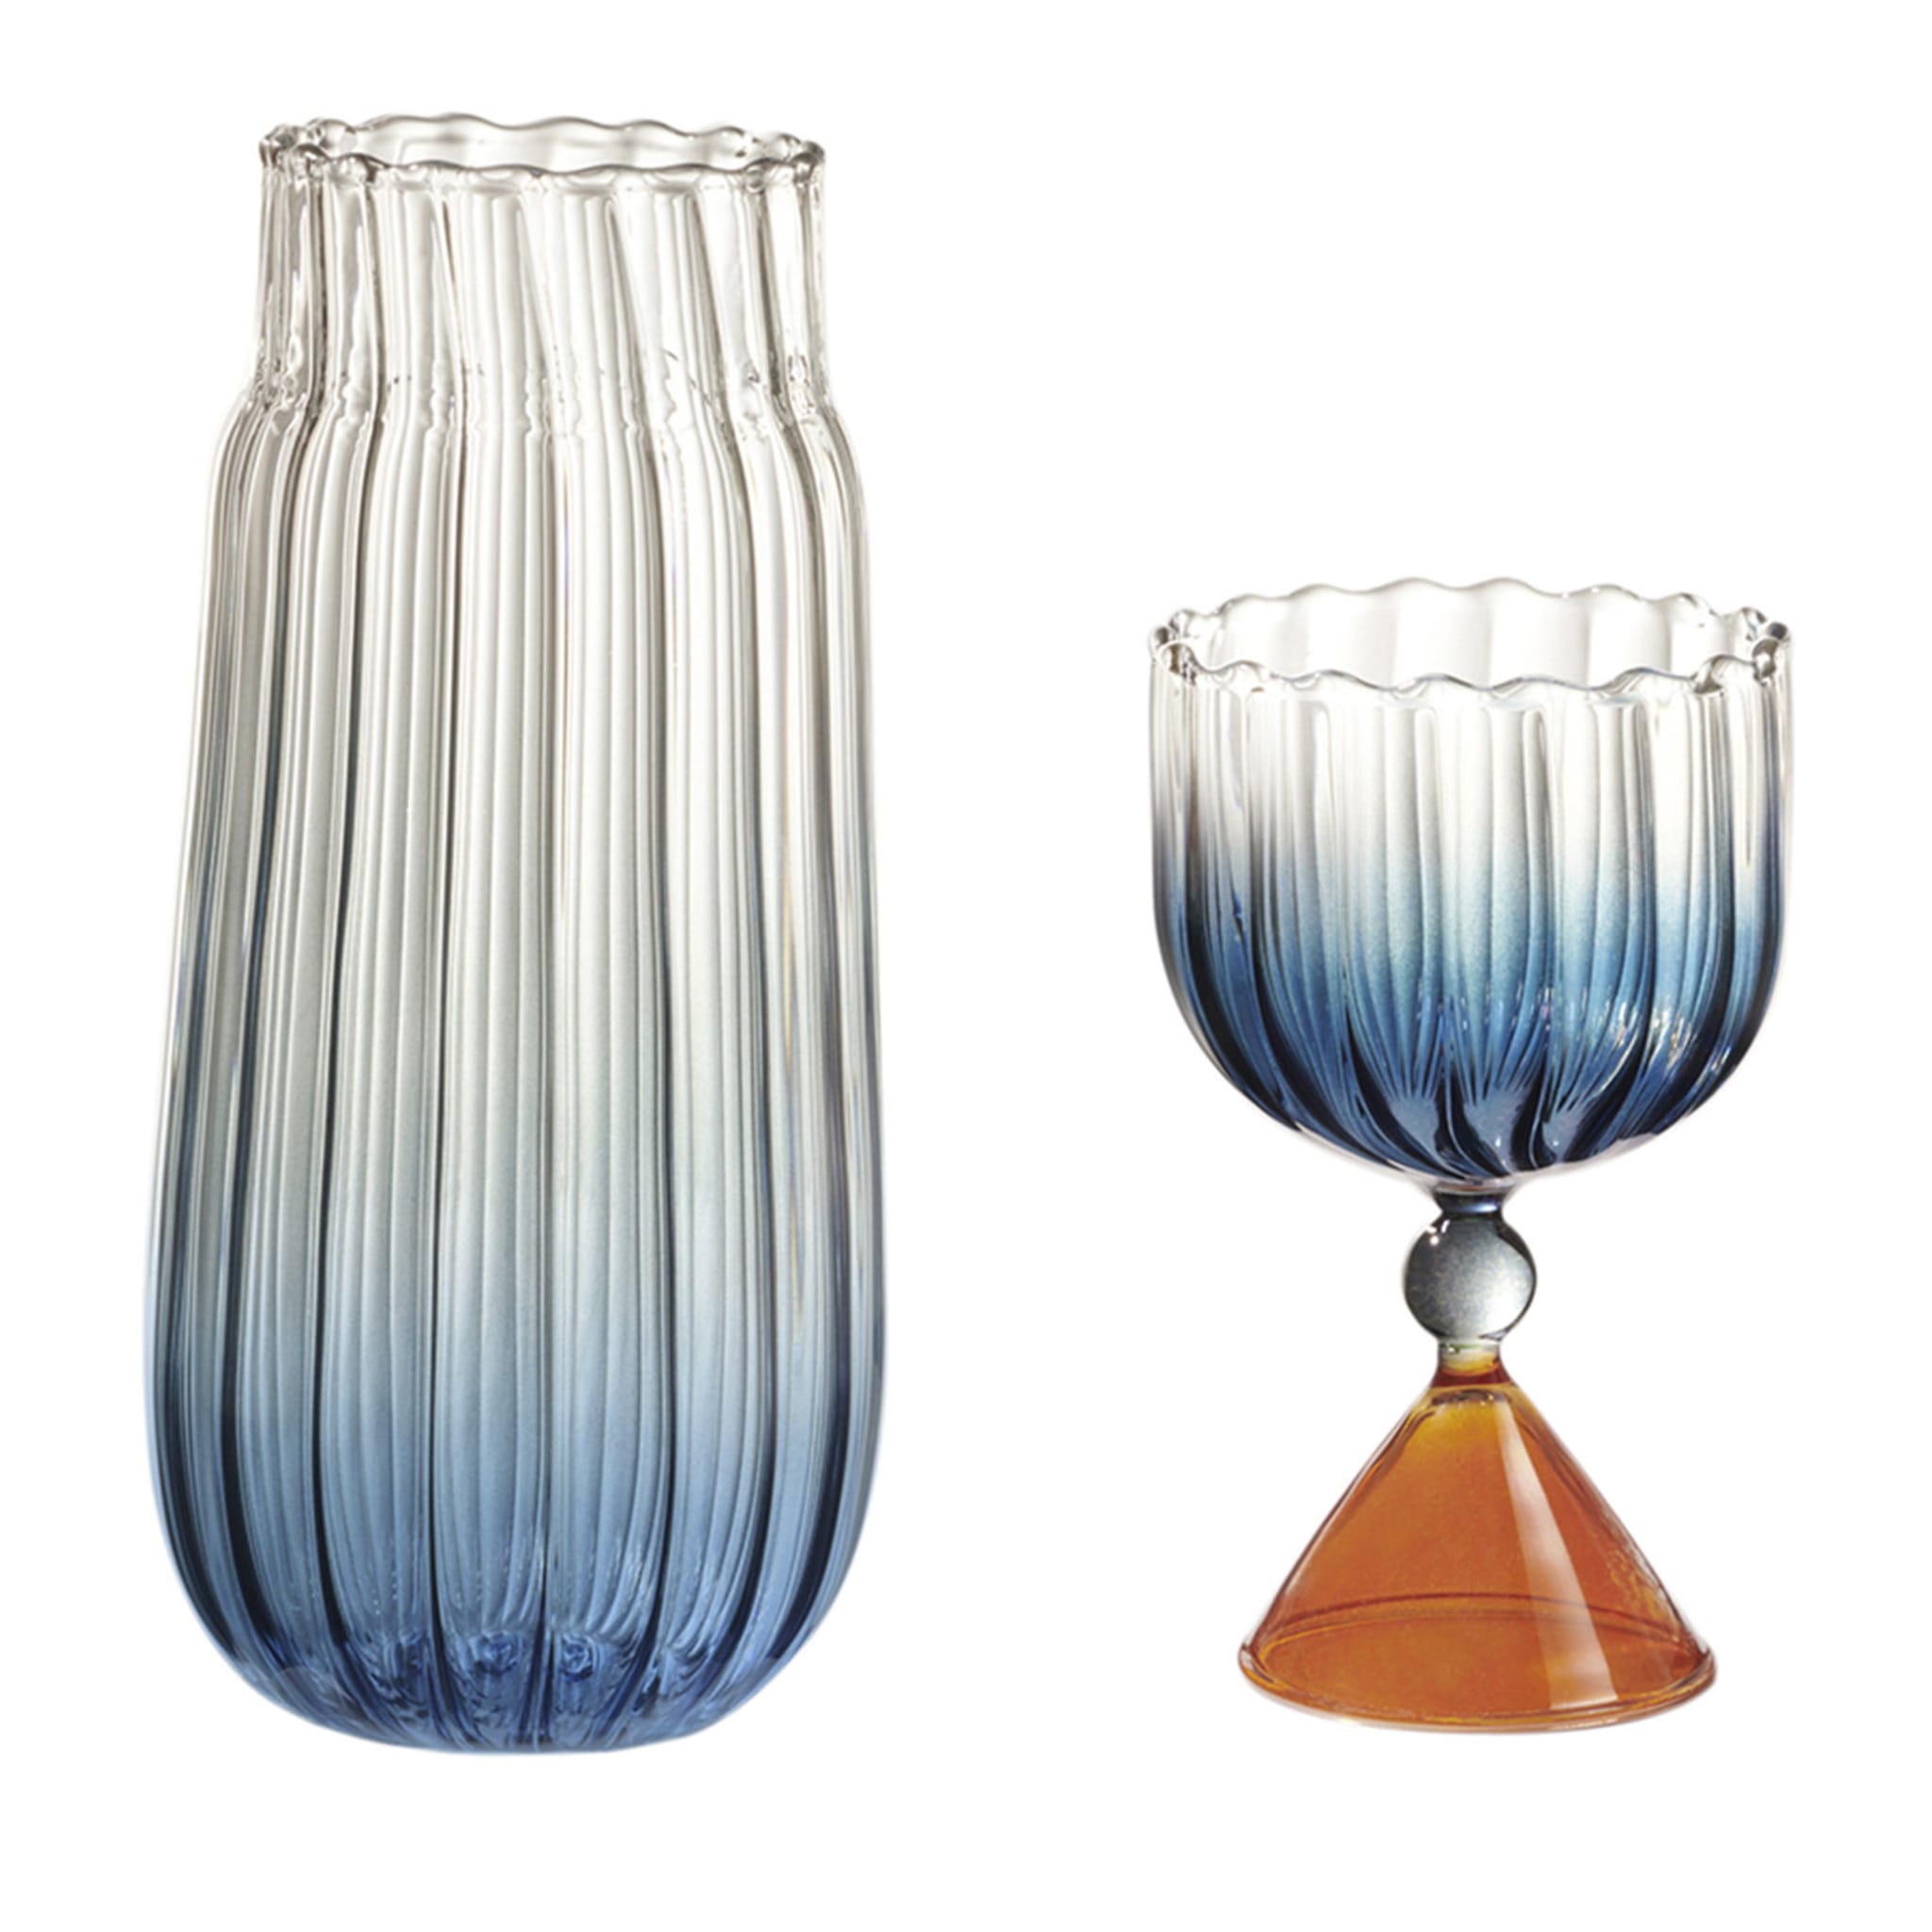 Calypso Blue Bottle and Glass - Main view